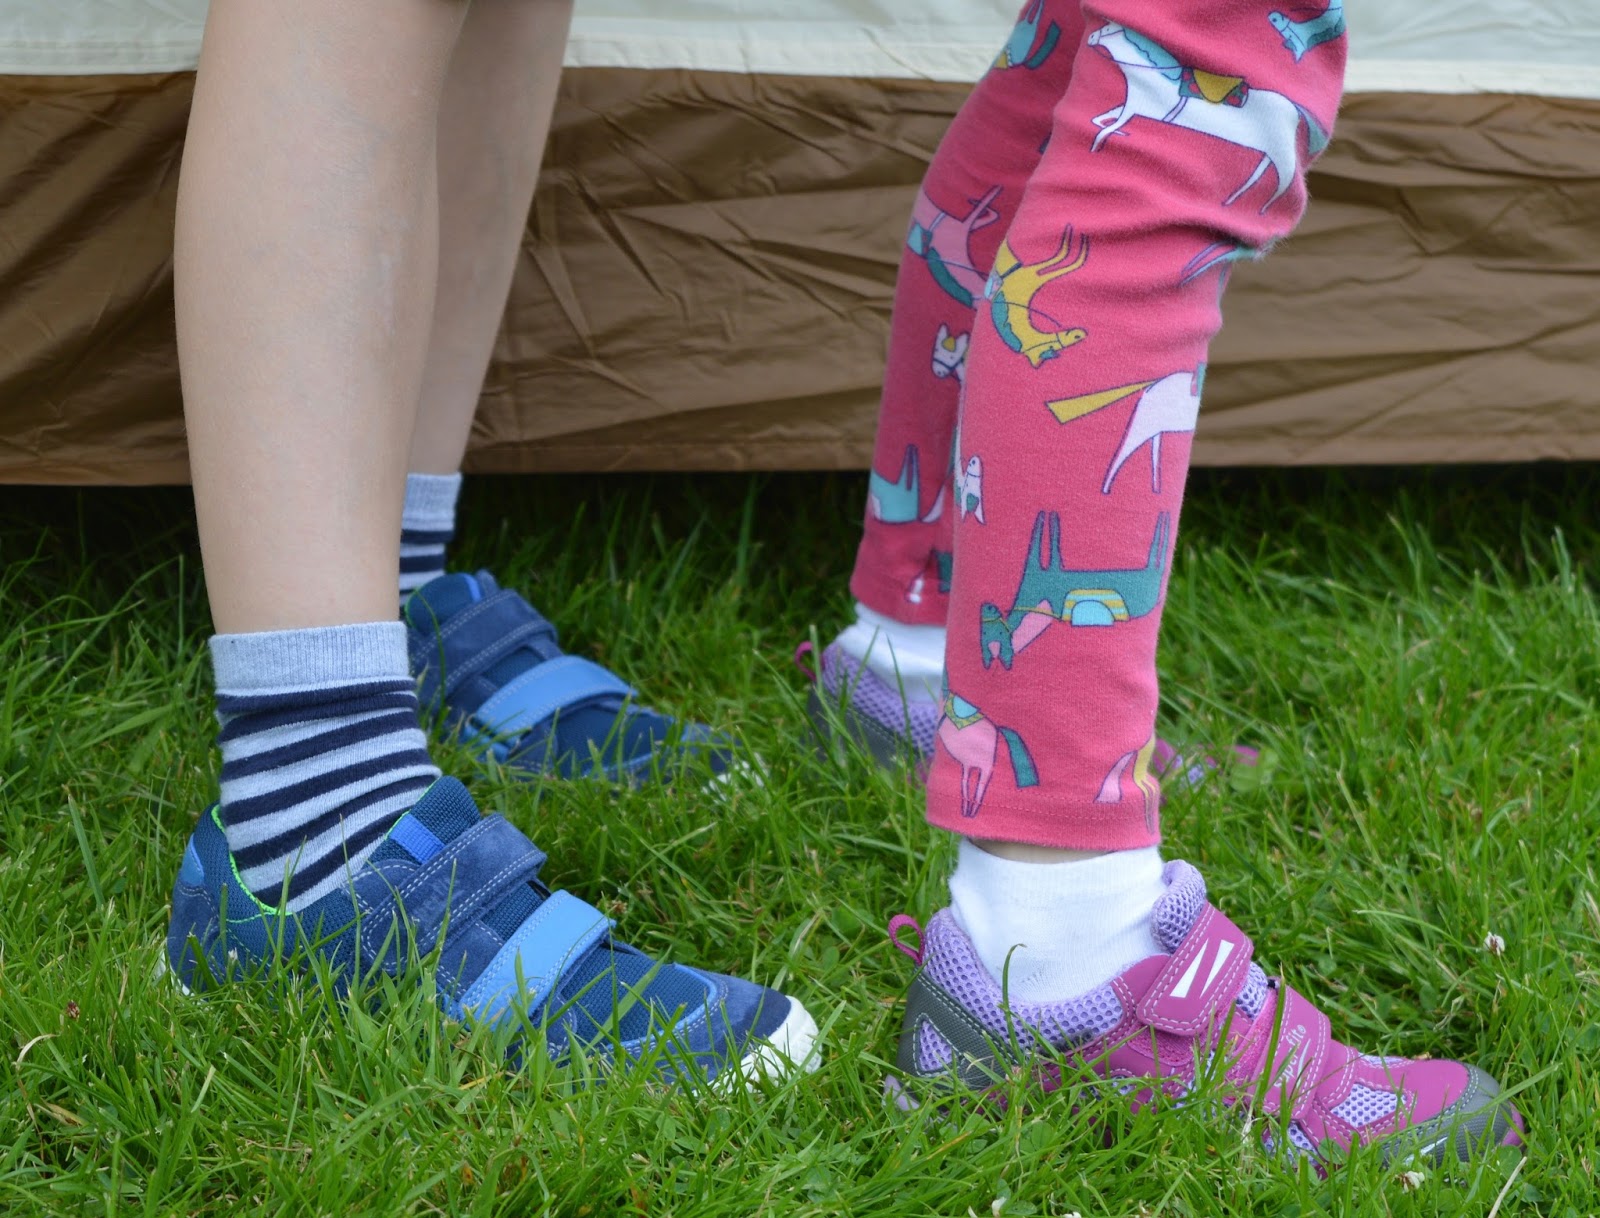 GORE-TEX shoes review - alternative footwear for children at festivals